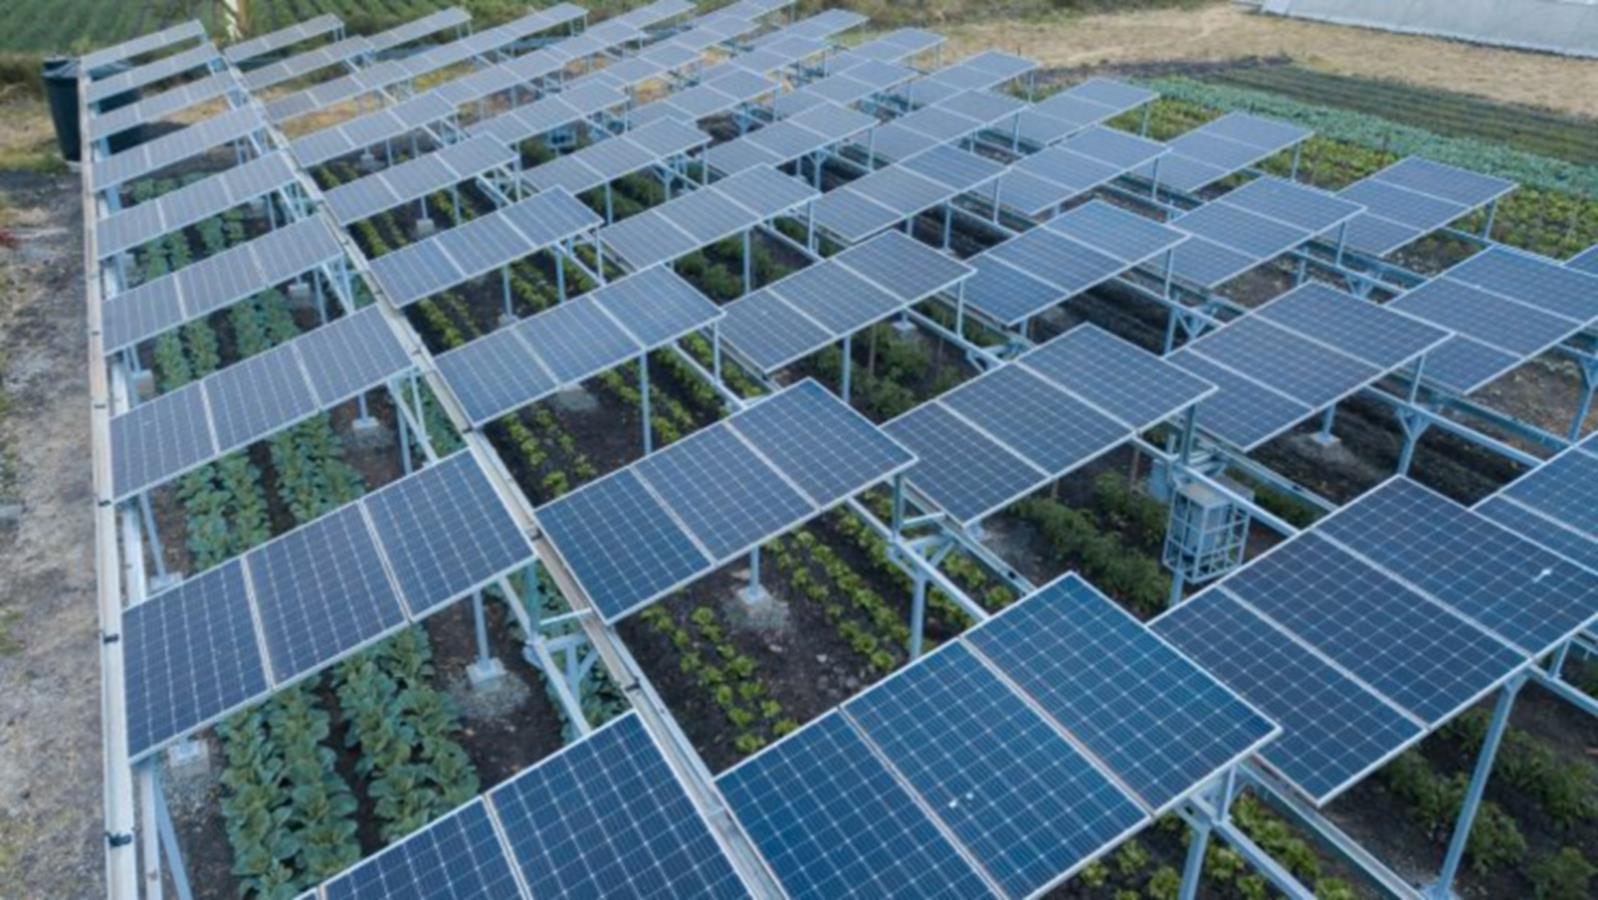 Kenya is testing solar panels to generate energy and assist in agriculture